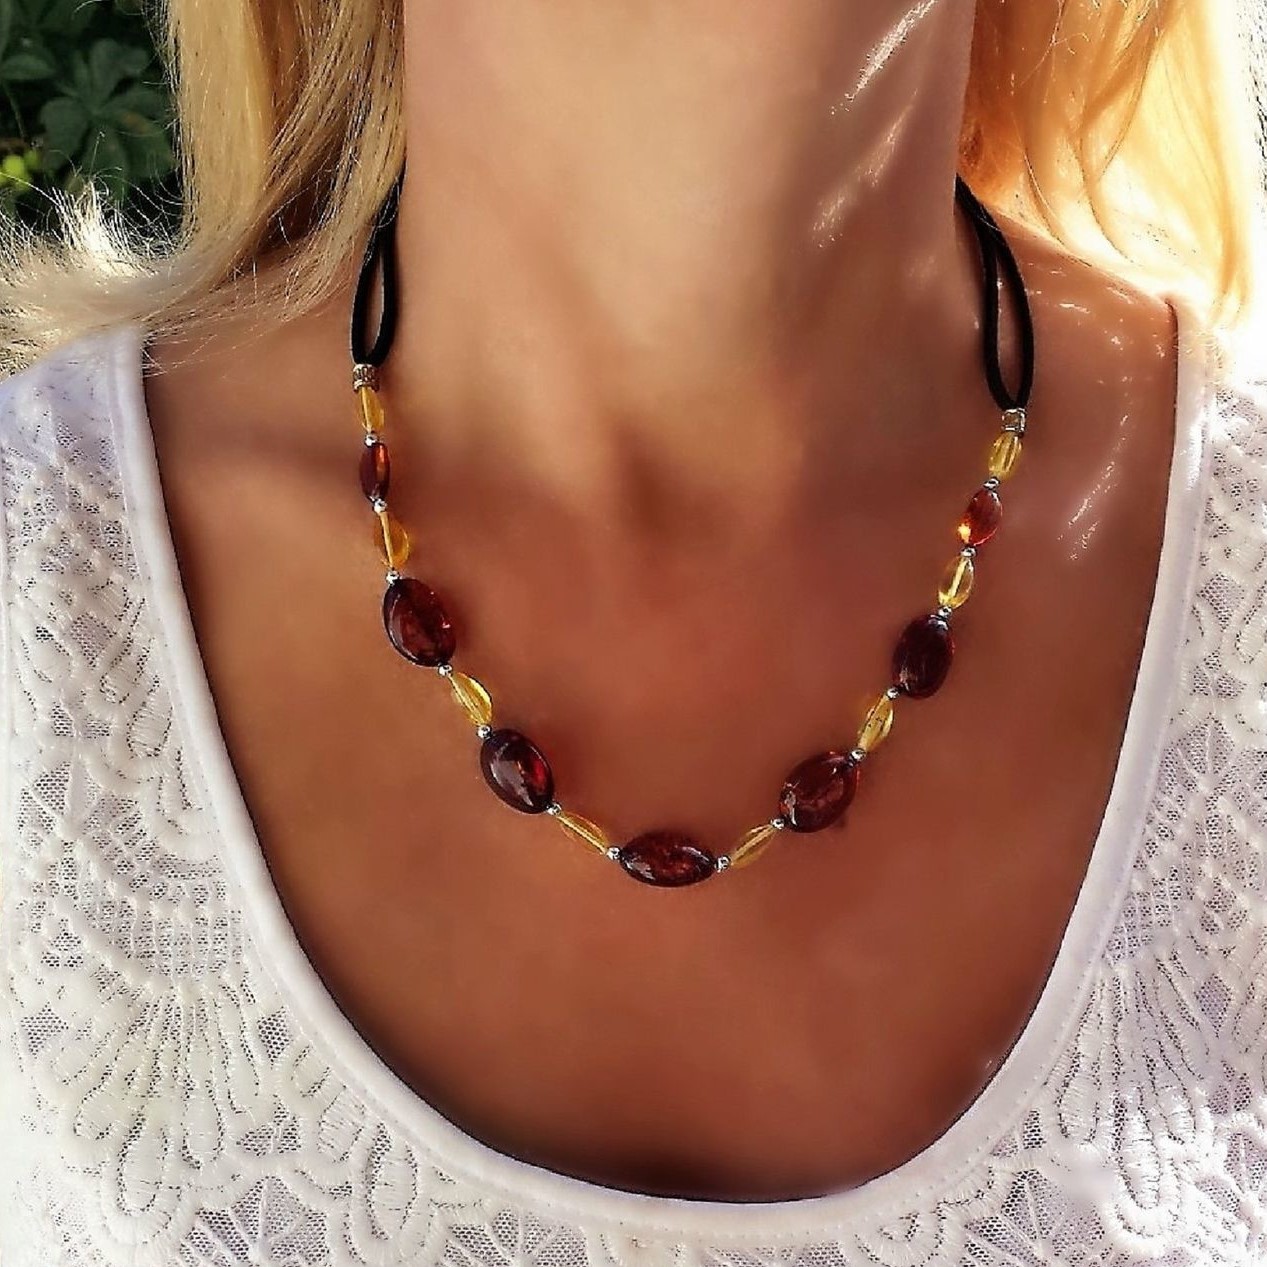 Adult Necklace - Cherry- 100% natural amber |Buy online